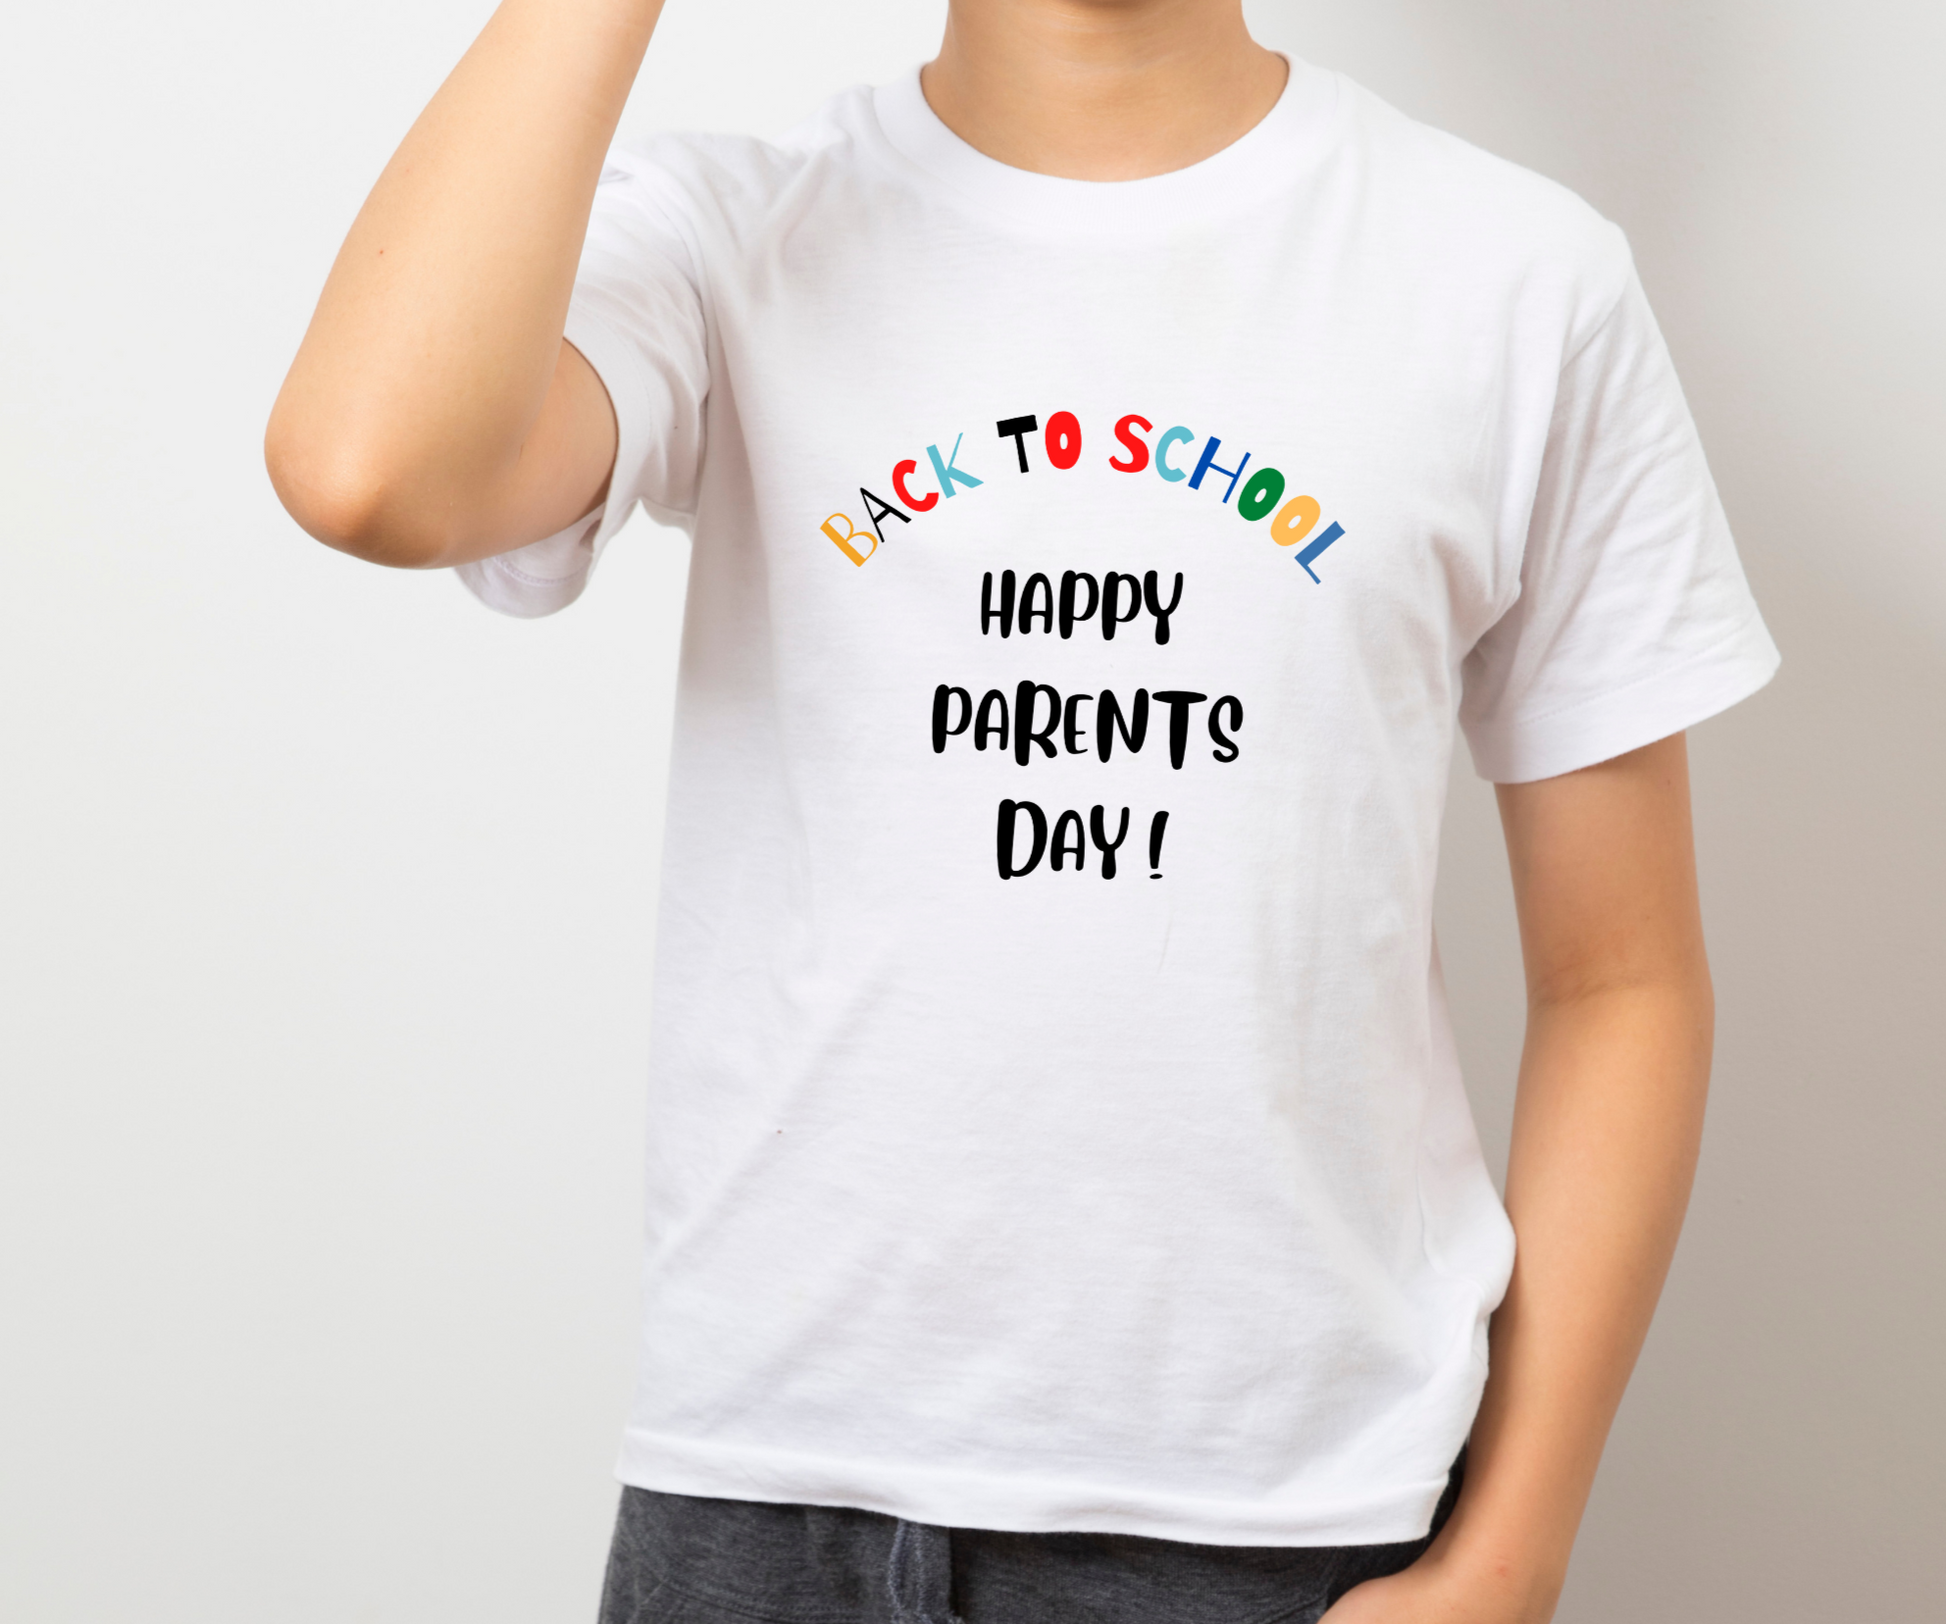 First Day of School Shirt for kids